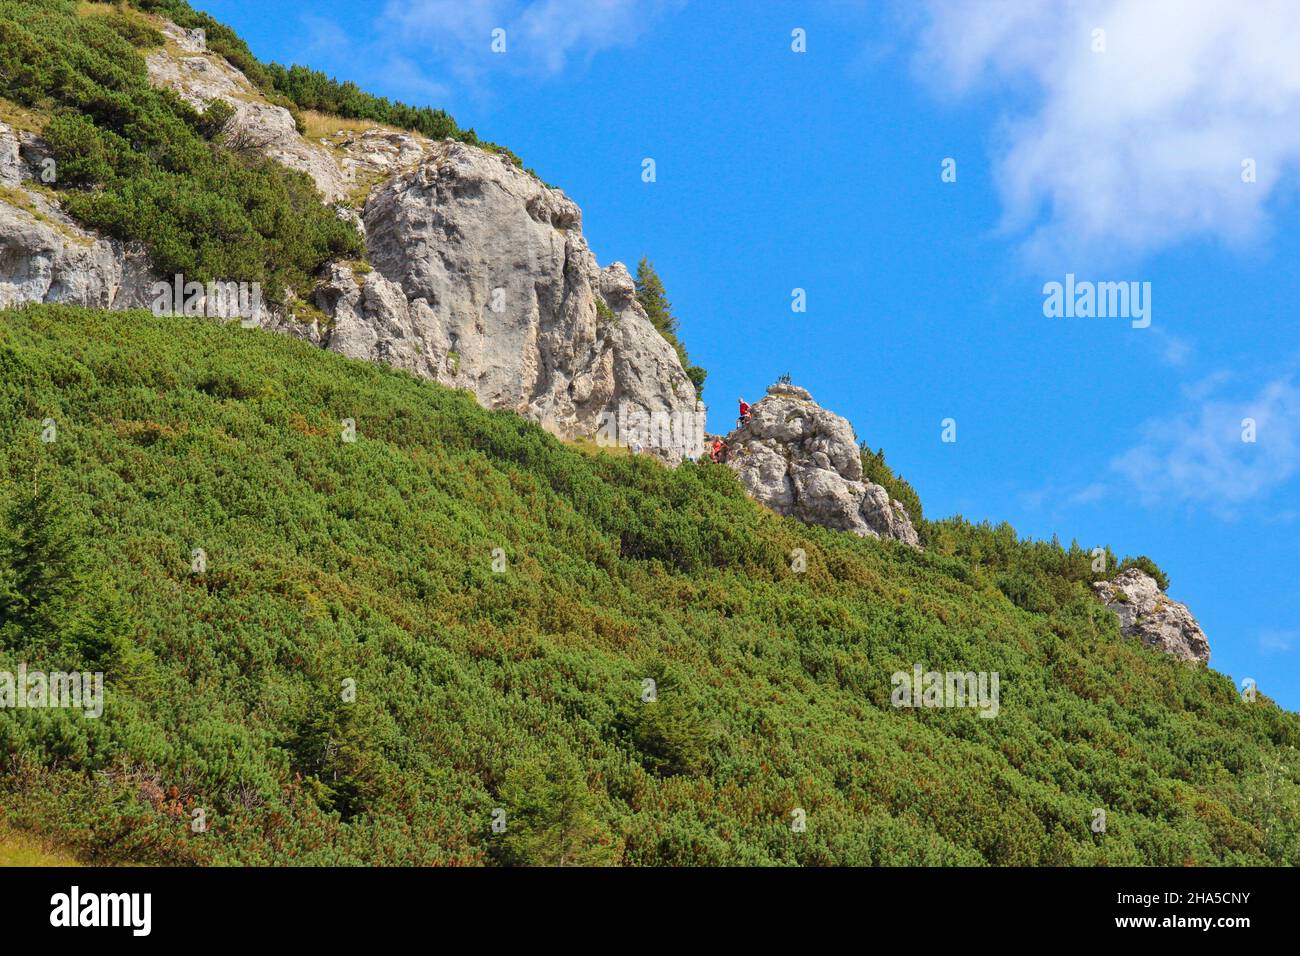 ascent to bärenkopf (1991m),rock face,mountain pine field,stony,hikers descending from the summit,blue sky,achensee,tyrol,austria Stock Photo